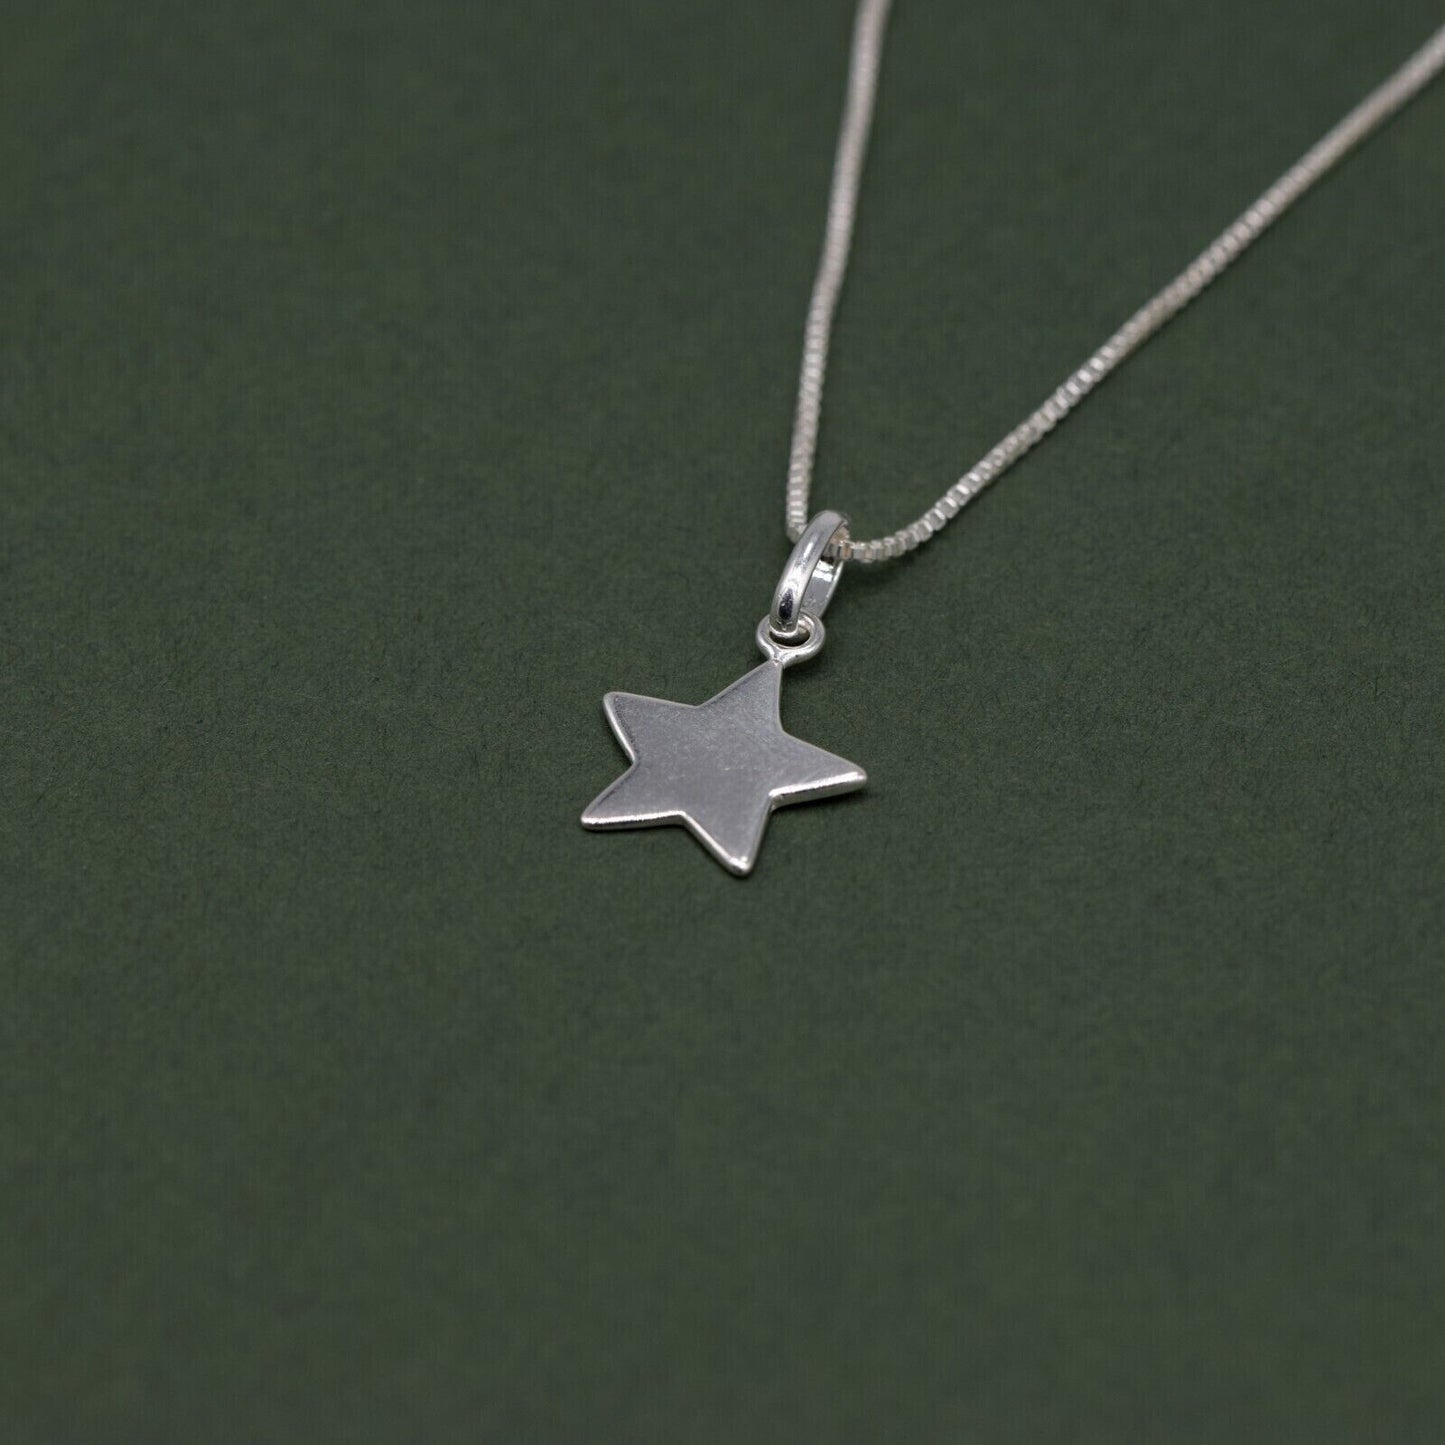 Genuine 925 Sterling Silver Flat Star Pendant Necklace on 14”-24" Box Chain